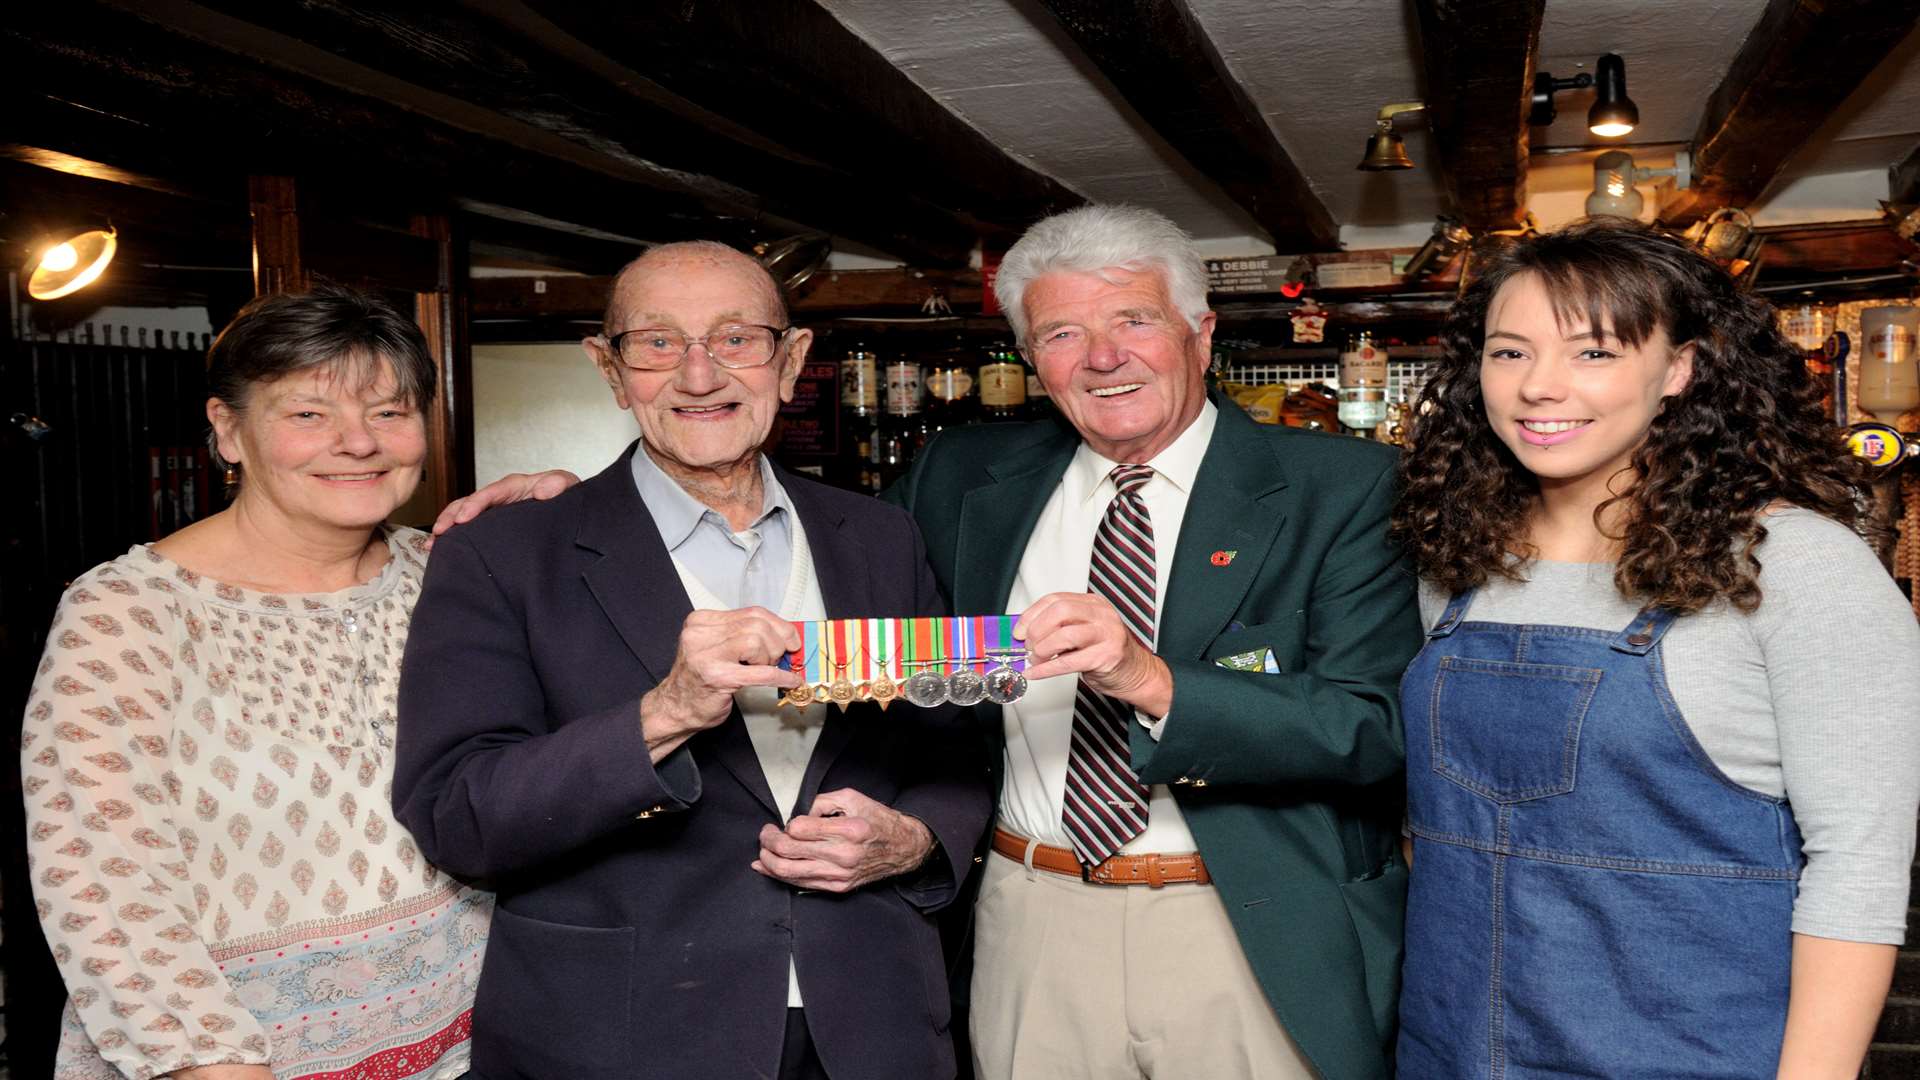 Anne Sparkes, Tom's daughter, with Tom Sparkes, David Warrington, and Kathryn Beckley, Tom's Granddaughter. Picture: Simon Hildrew